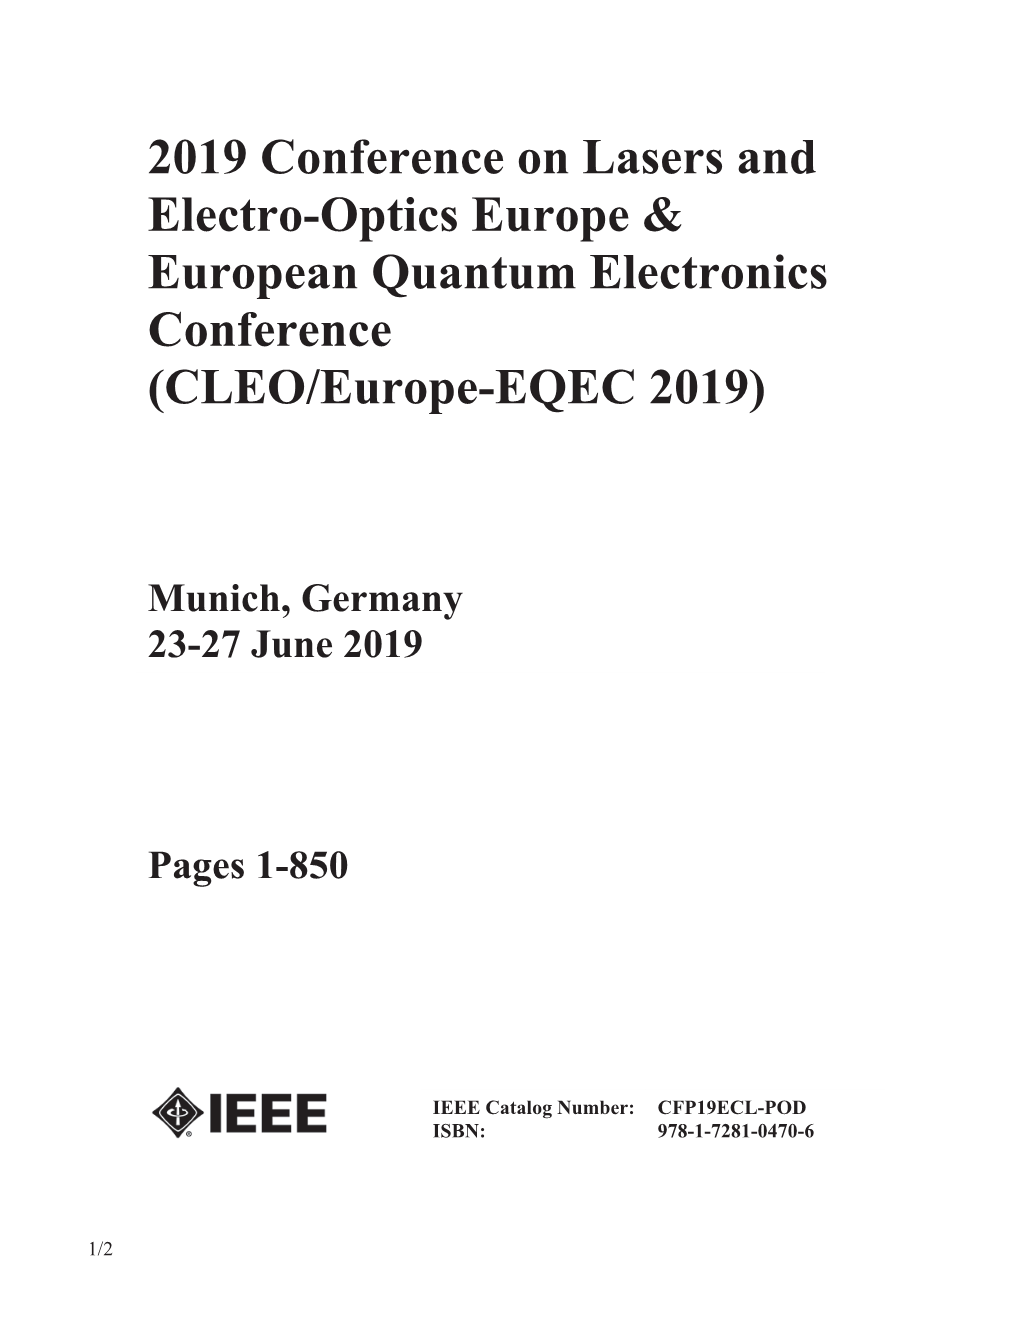 2019 Conference on Lasers and Electro-Optics Europe & European Quantum Electronics Conference (CLEO/Europe-EQEC 2019)